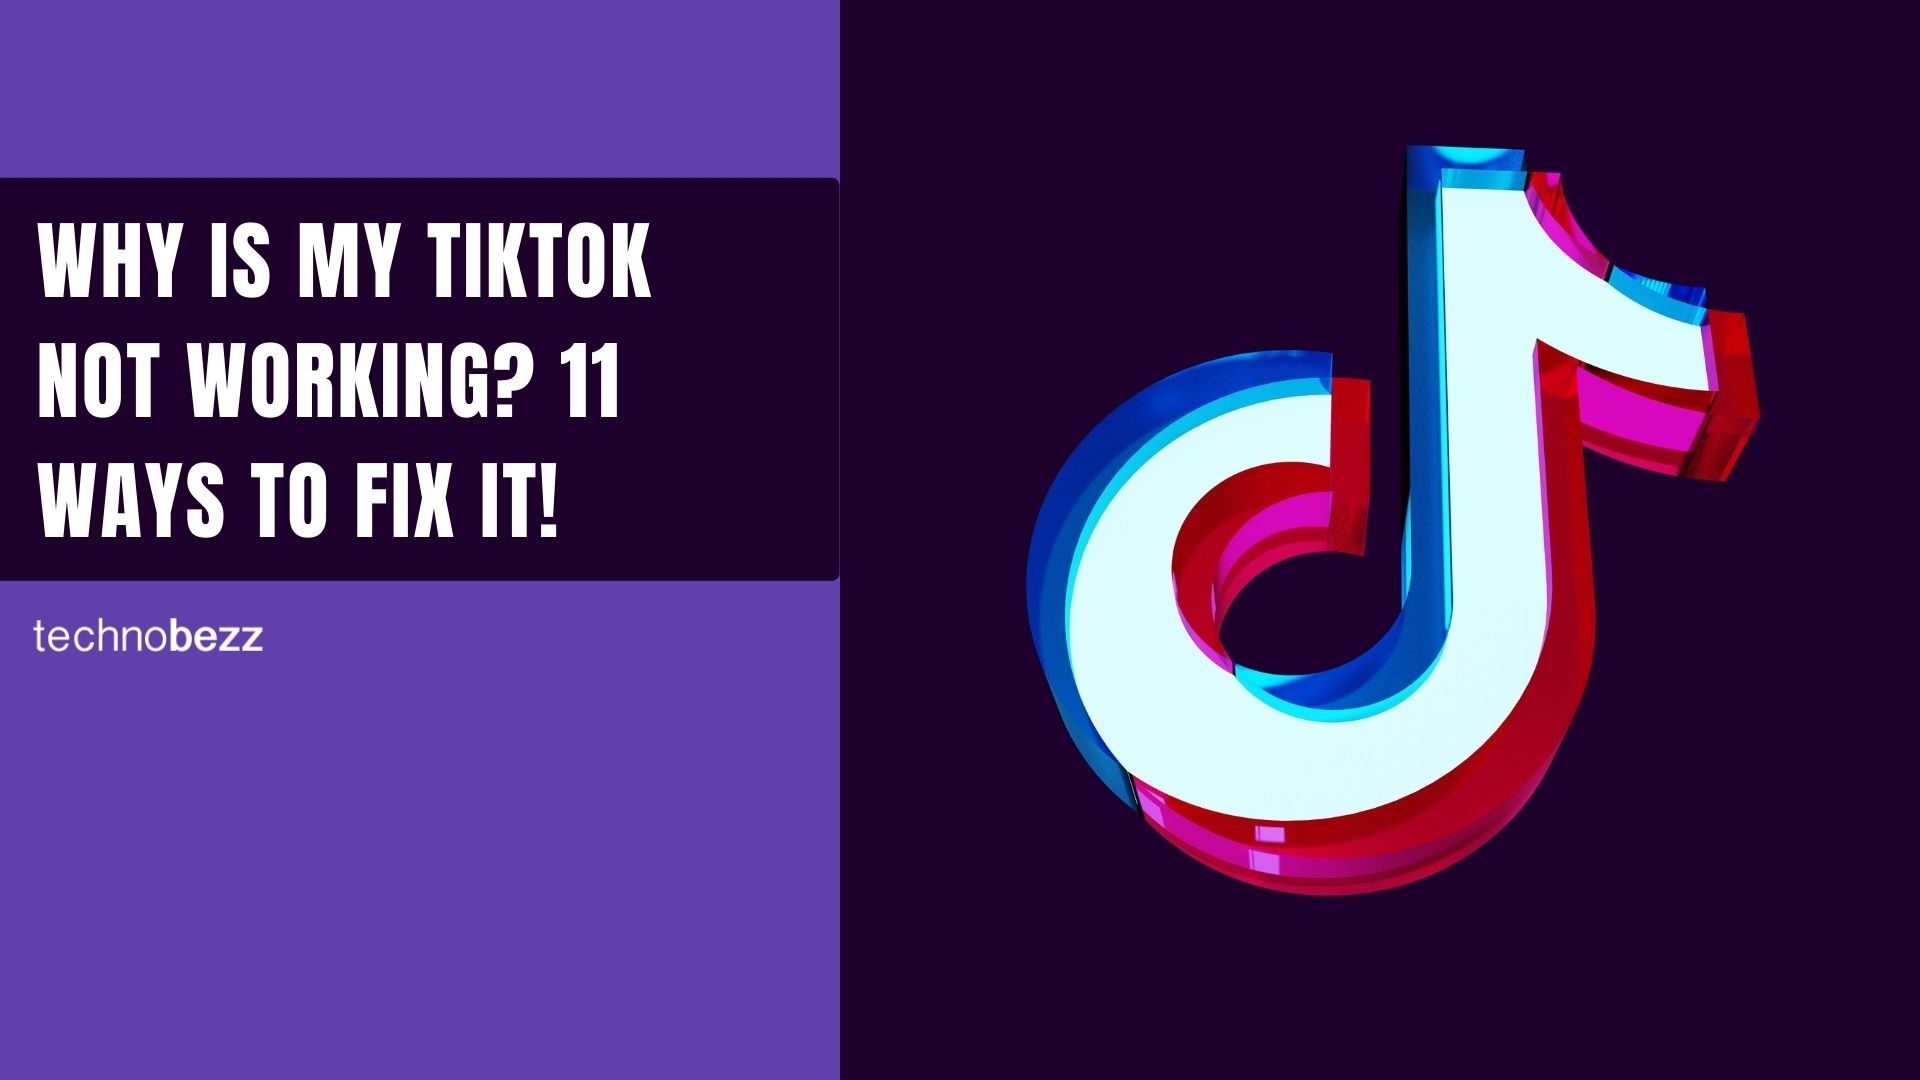 Why Is My TikTok Not Working, Videos Not Posting? 11 Ways To Fix It!